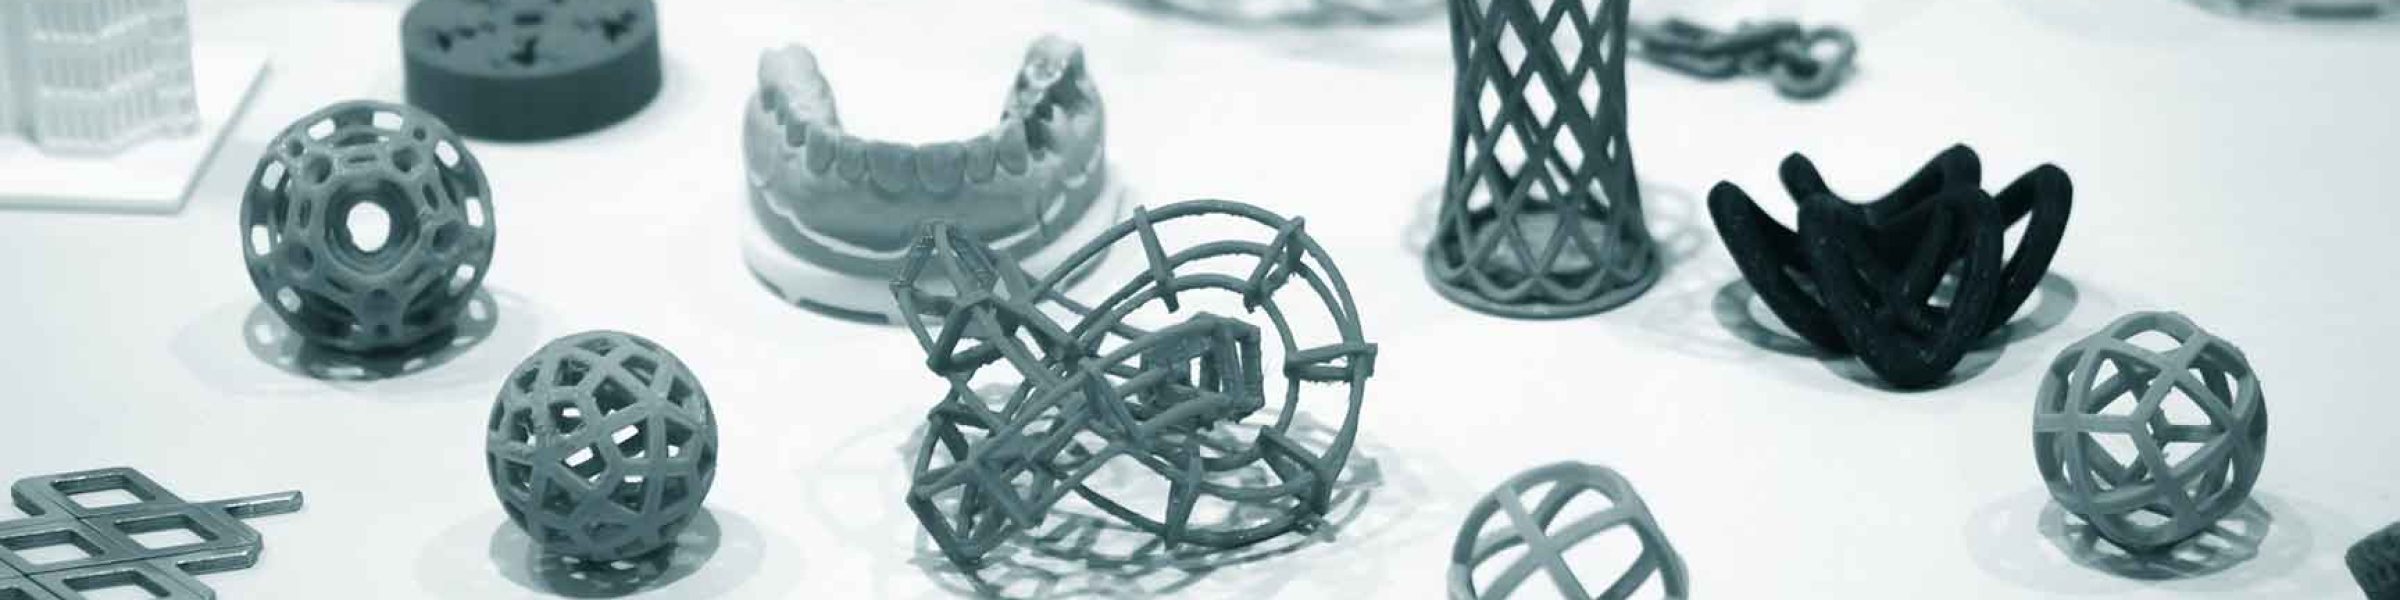 Additive-Manufacturing---On-Demand-Manufacturing